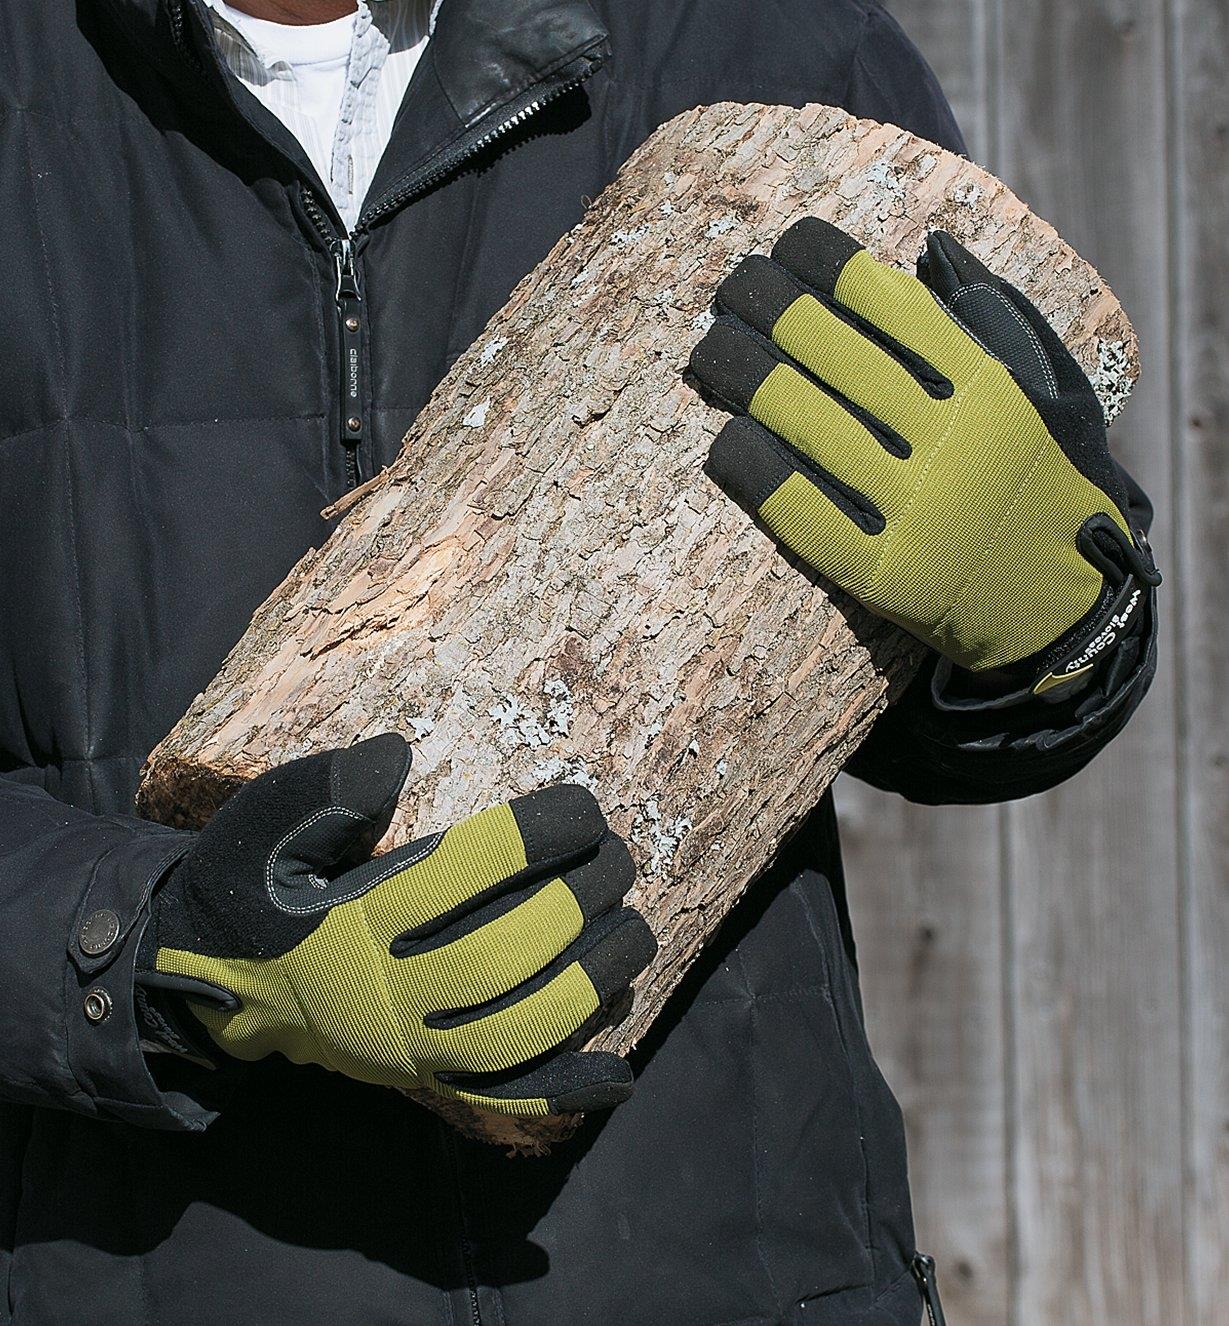 Holding a log while wearing Cold-Weather Gloves